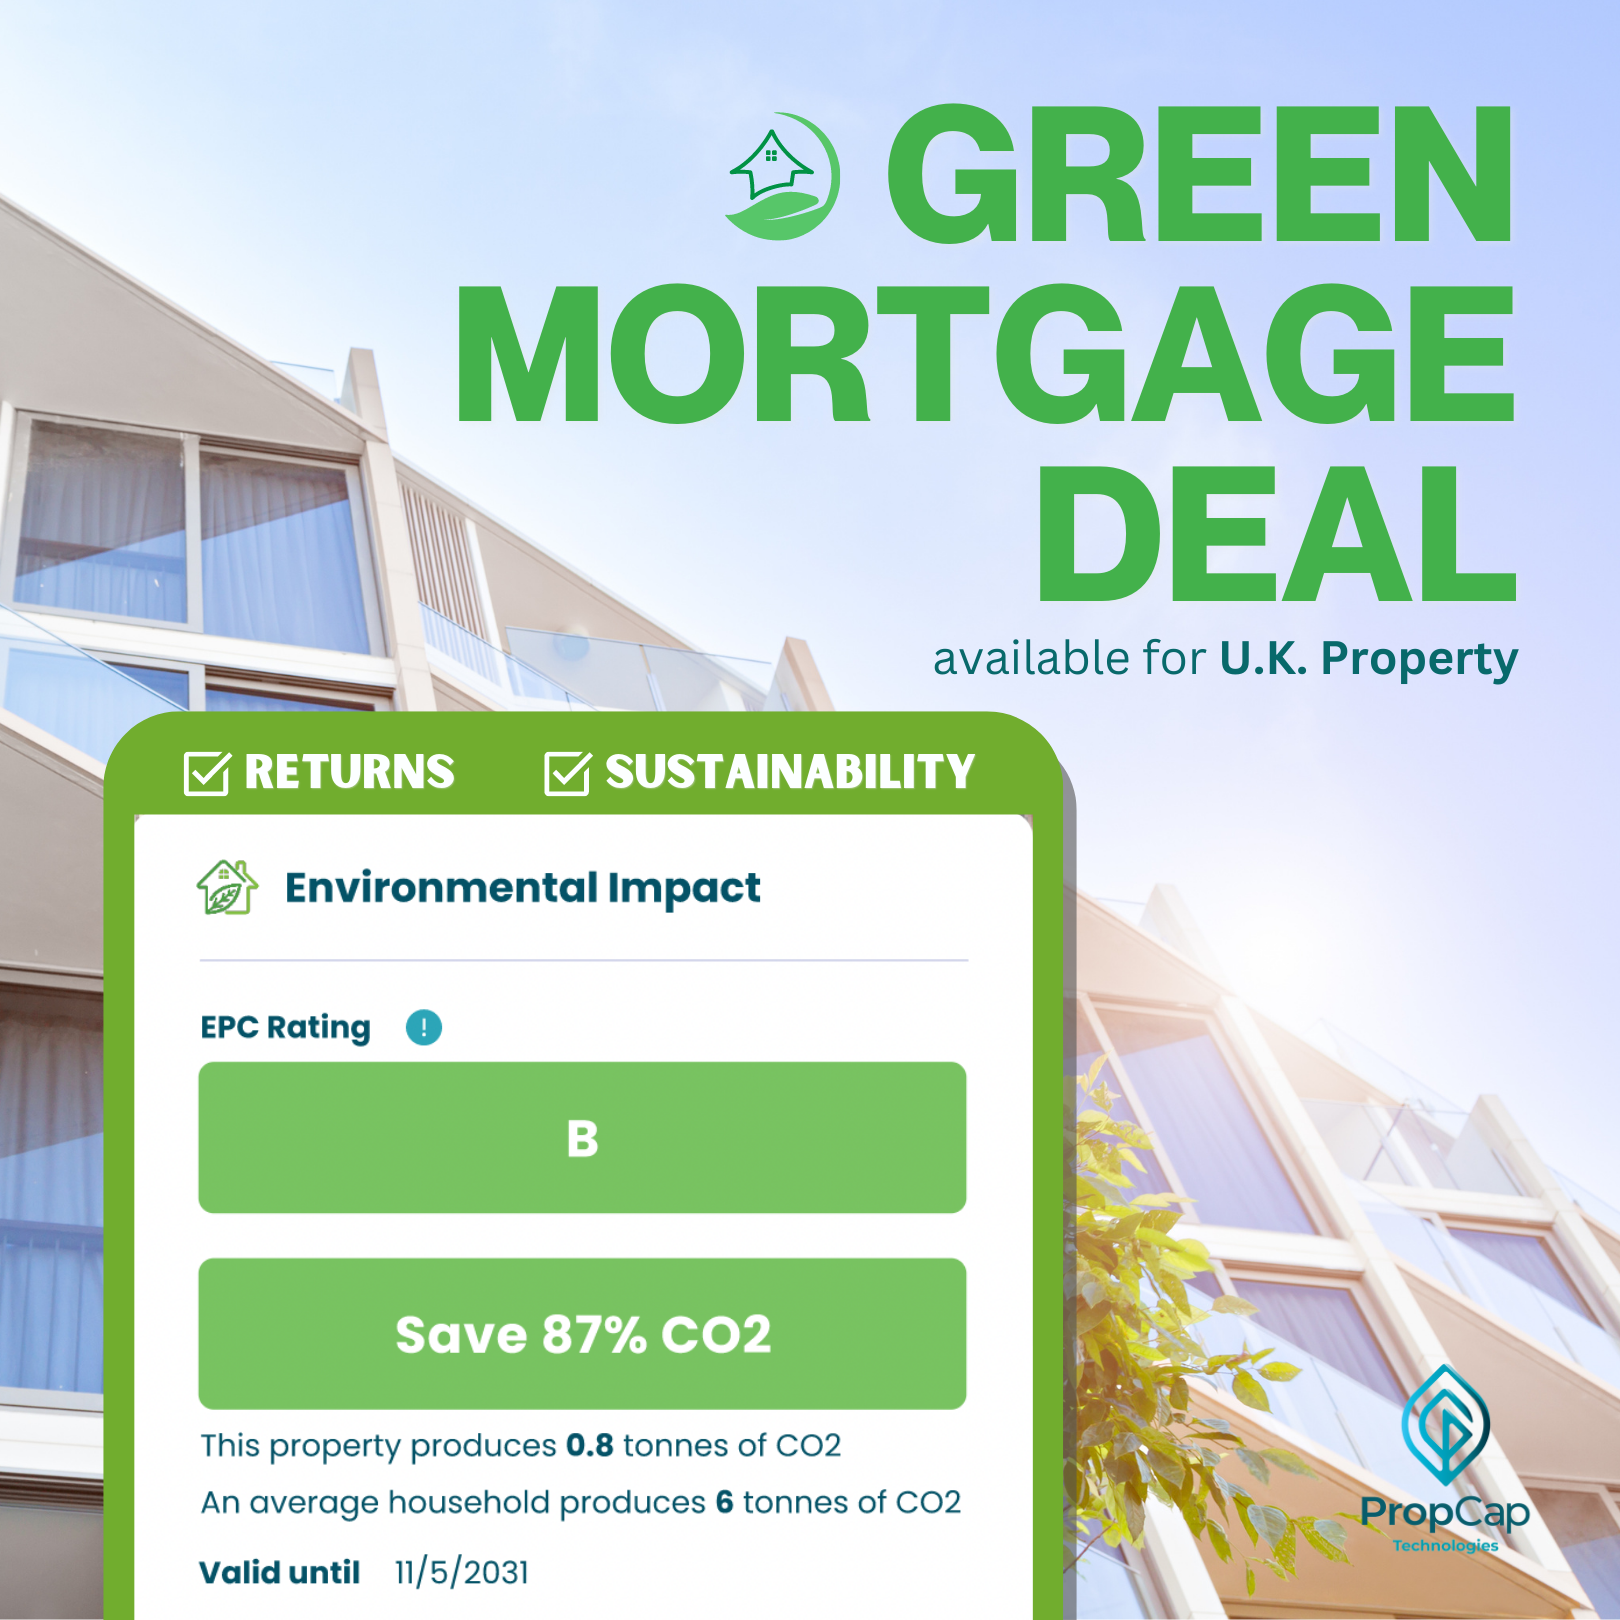 “Green Mortgage Deal” Launched